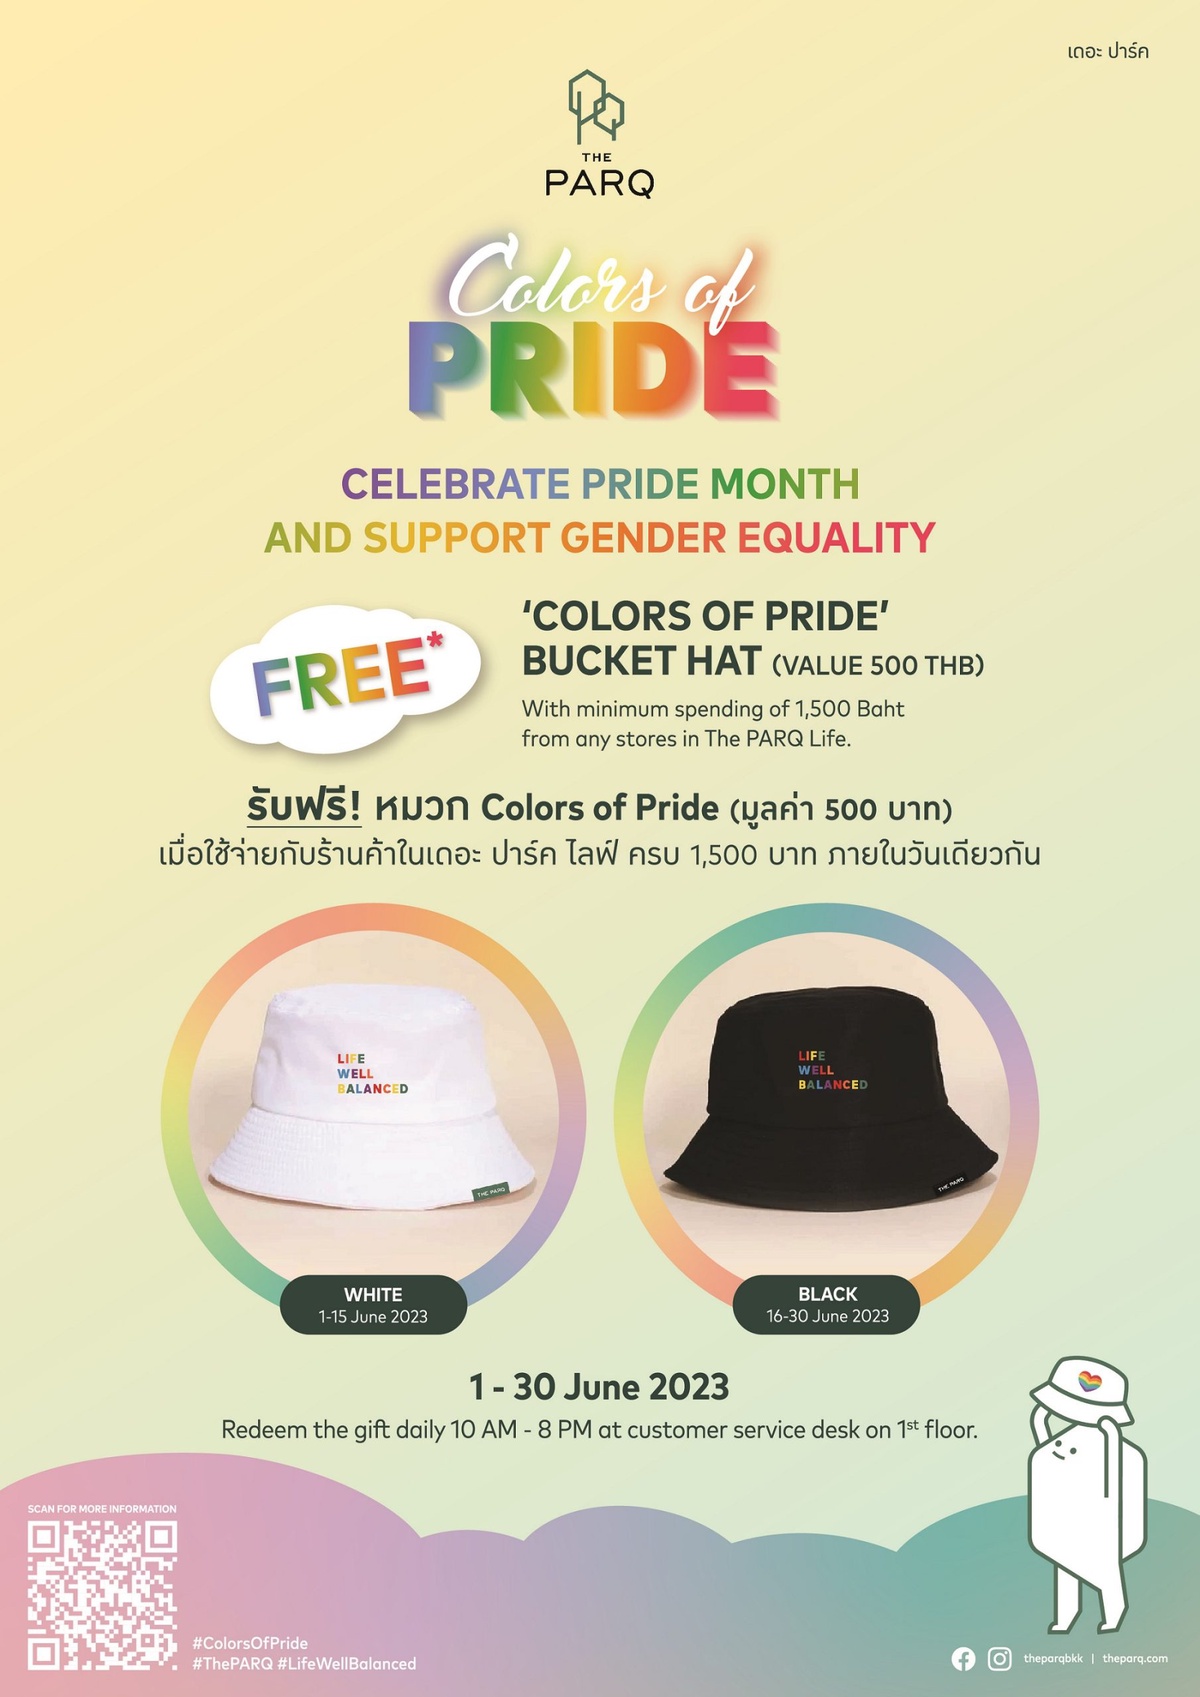 The PARQ Celebrates Pride Month with Colors of Pride Campaign Supporting Equality and Gender Diversity through Special Promotions and Various Activities Throughout June.